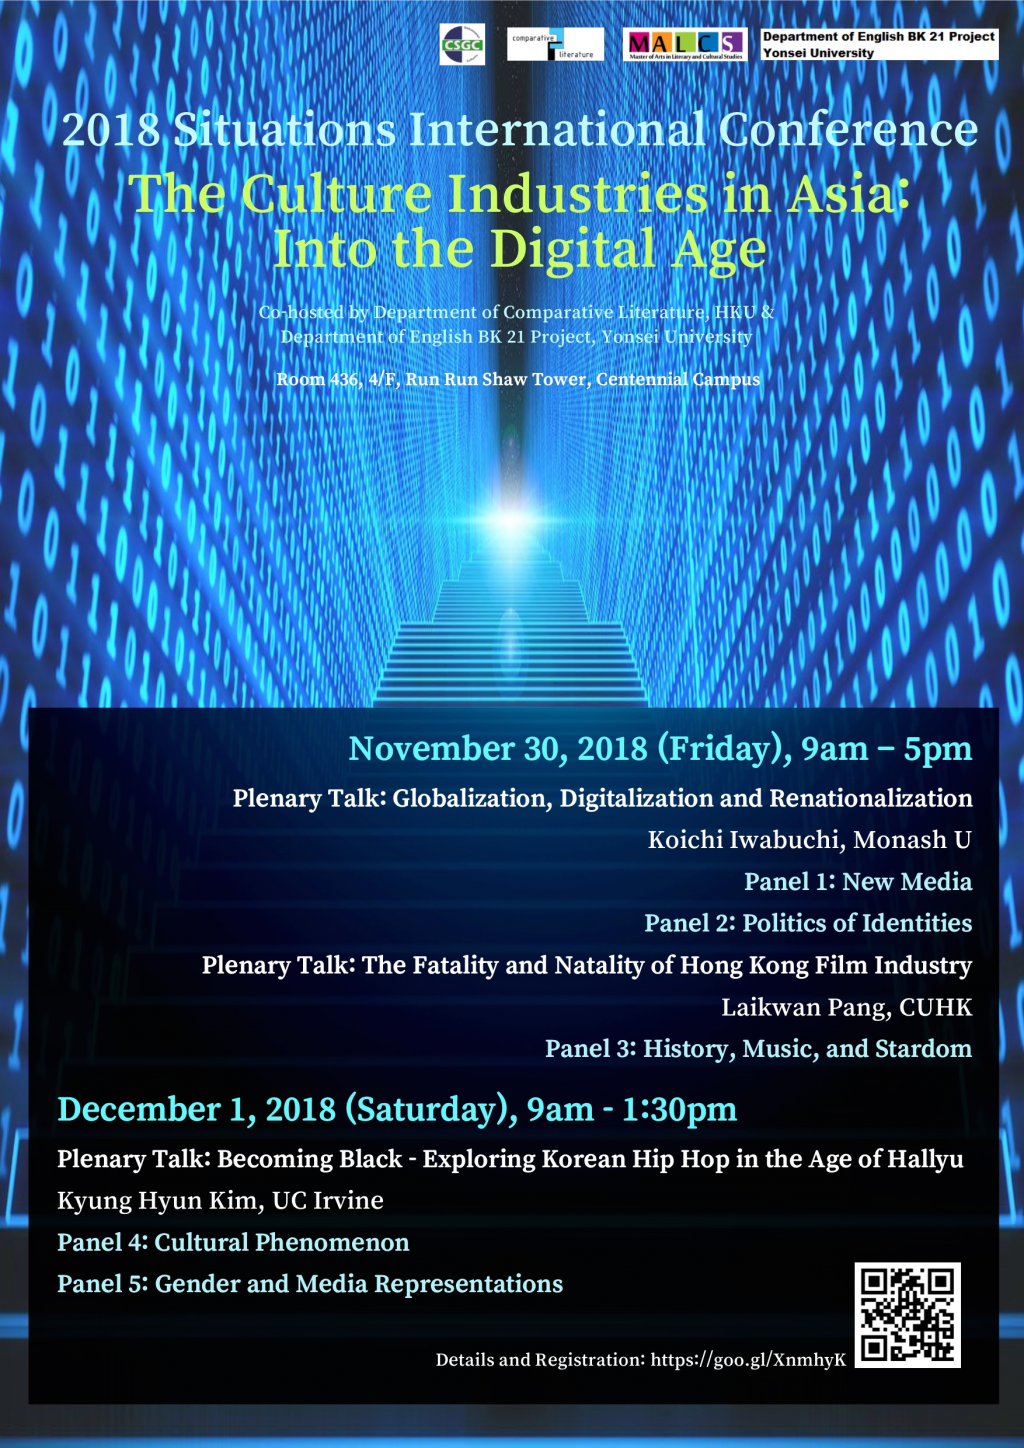 2018 Situations International Conference, The Culture Industries in Asia: Into the Digital Age